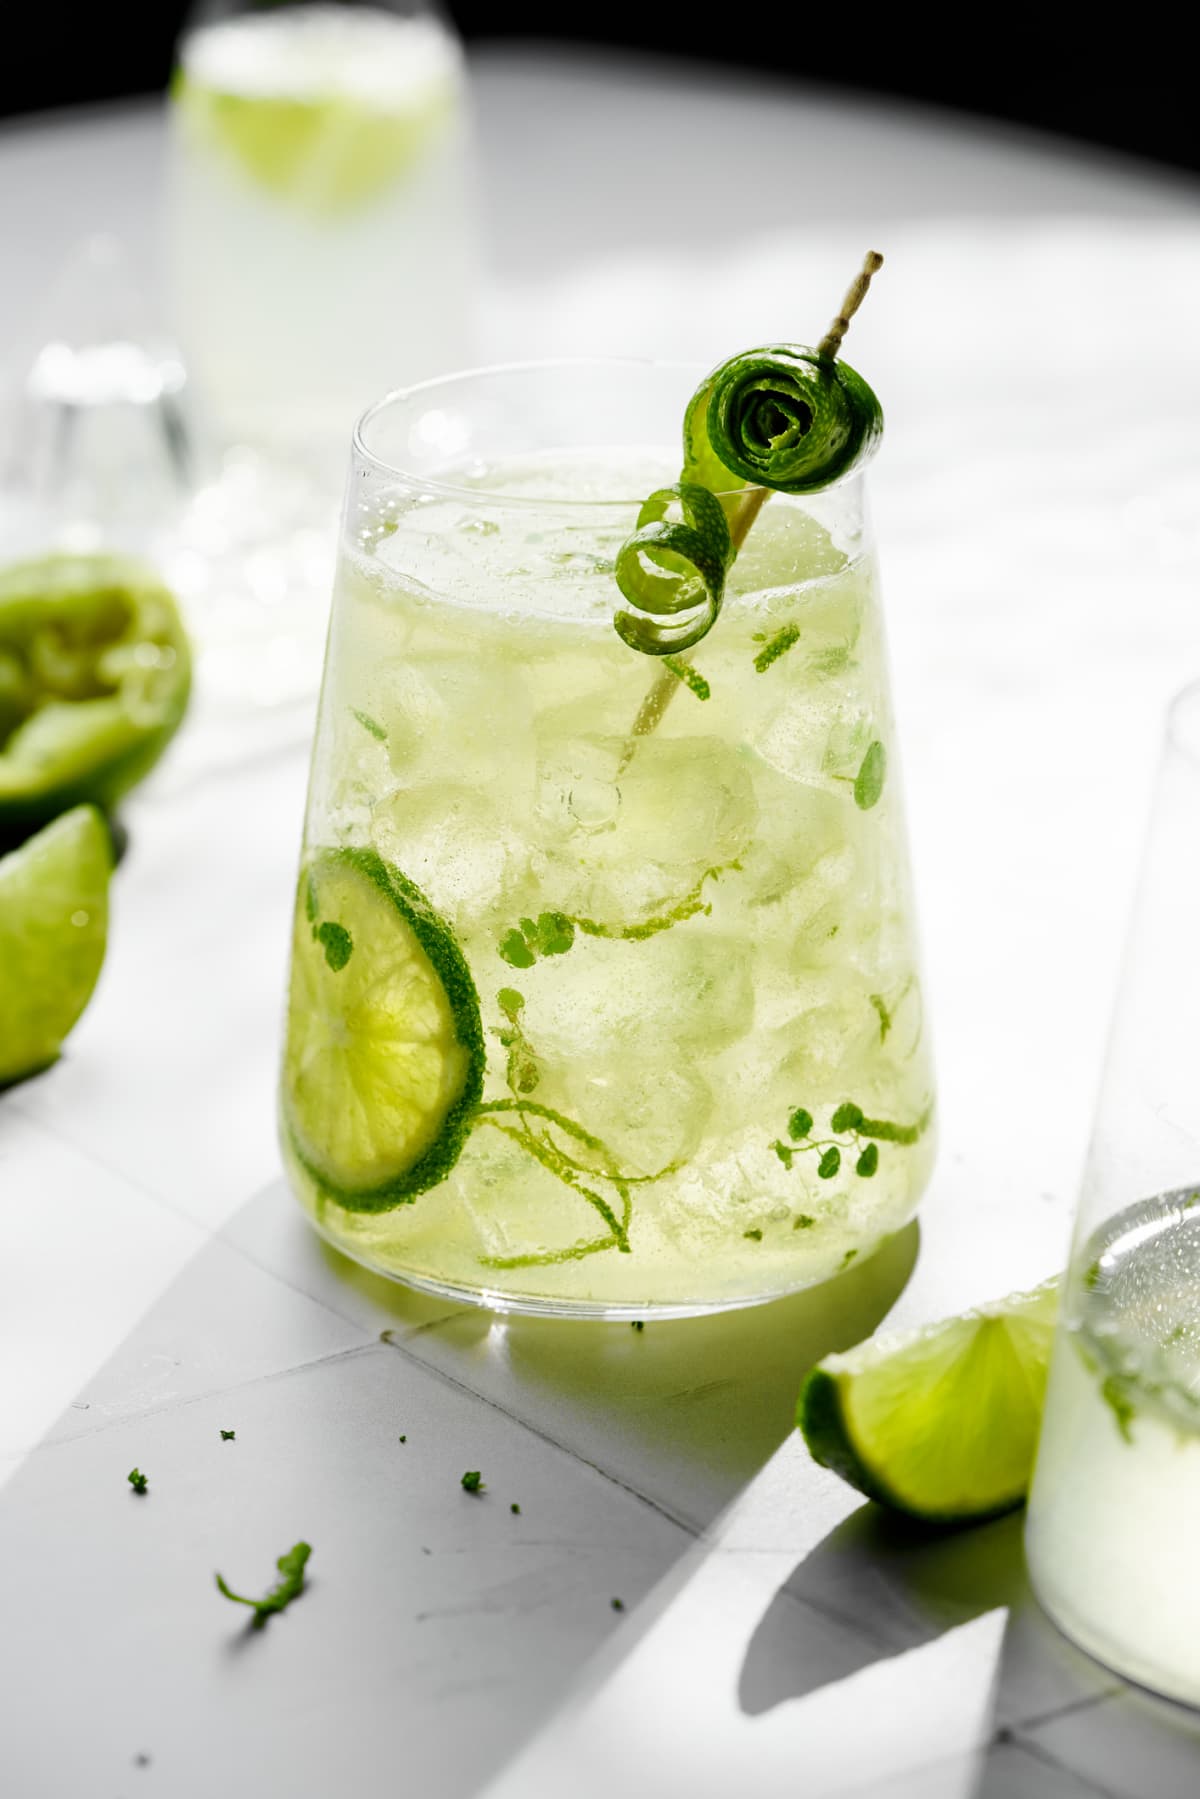 Caipirinha cocktail with lime and cucumber garnishes on wooden table.